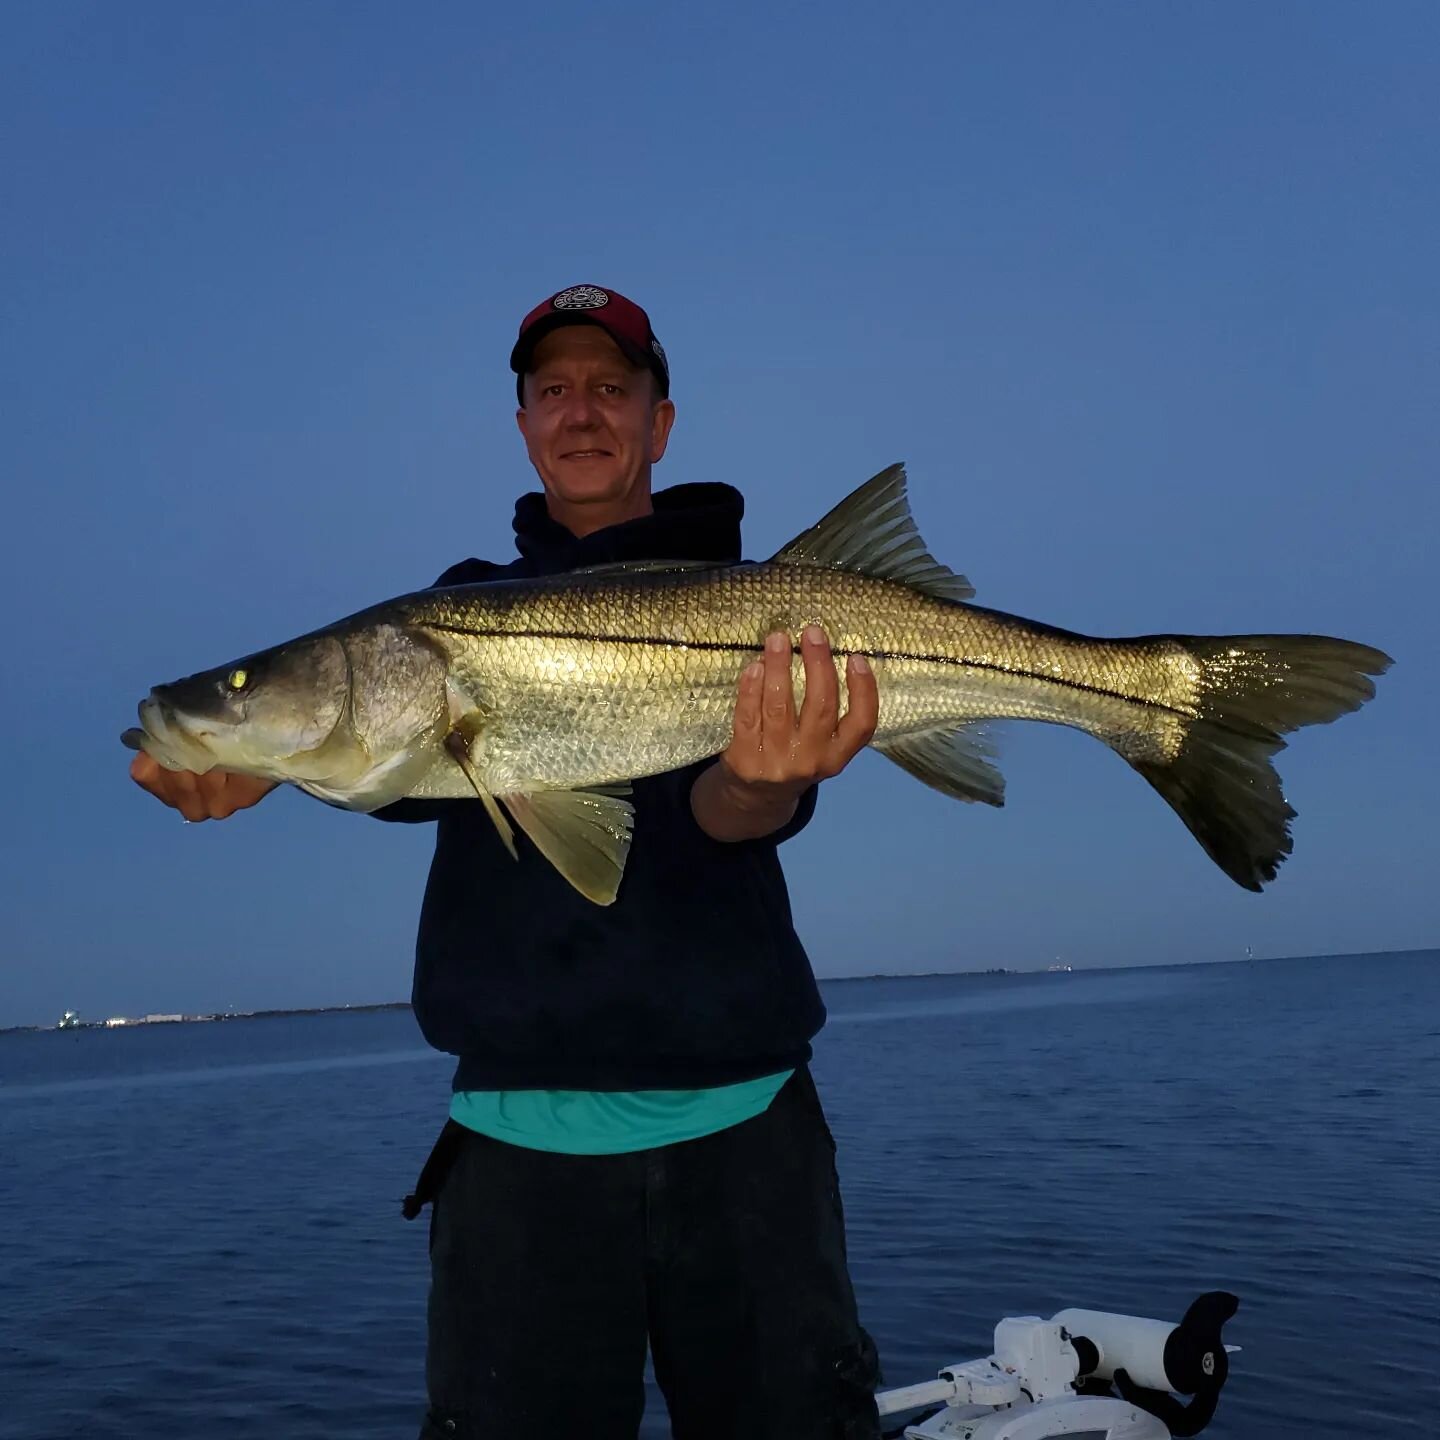 Big girls come out to play on the extreme low tides. Justin with his pb snook 39&quot;
www.storymakerfishingcharters.com 
813-431-9205  Come get some!

@pennfishing @simradyachting @saltlife @cca_florida @realsaltlife @pelicancoolers @yamahaoutboards